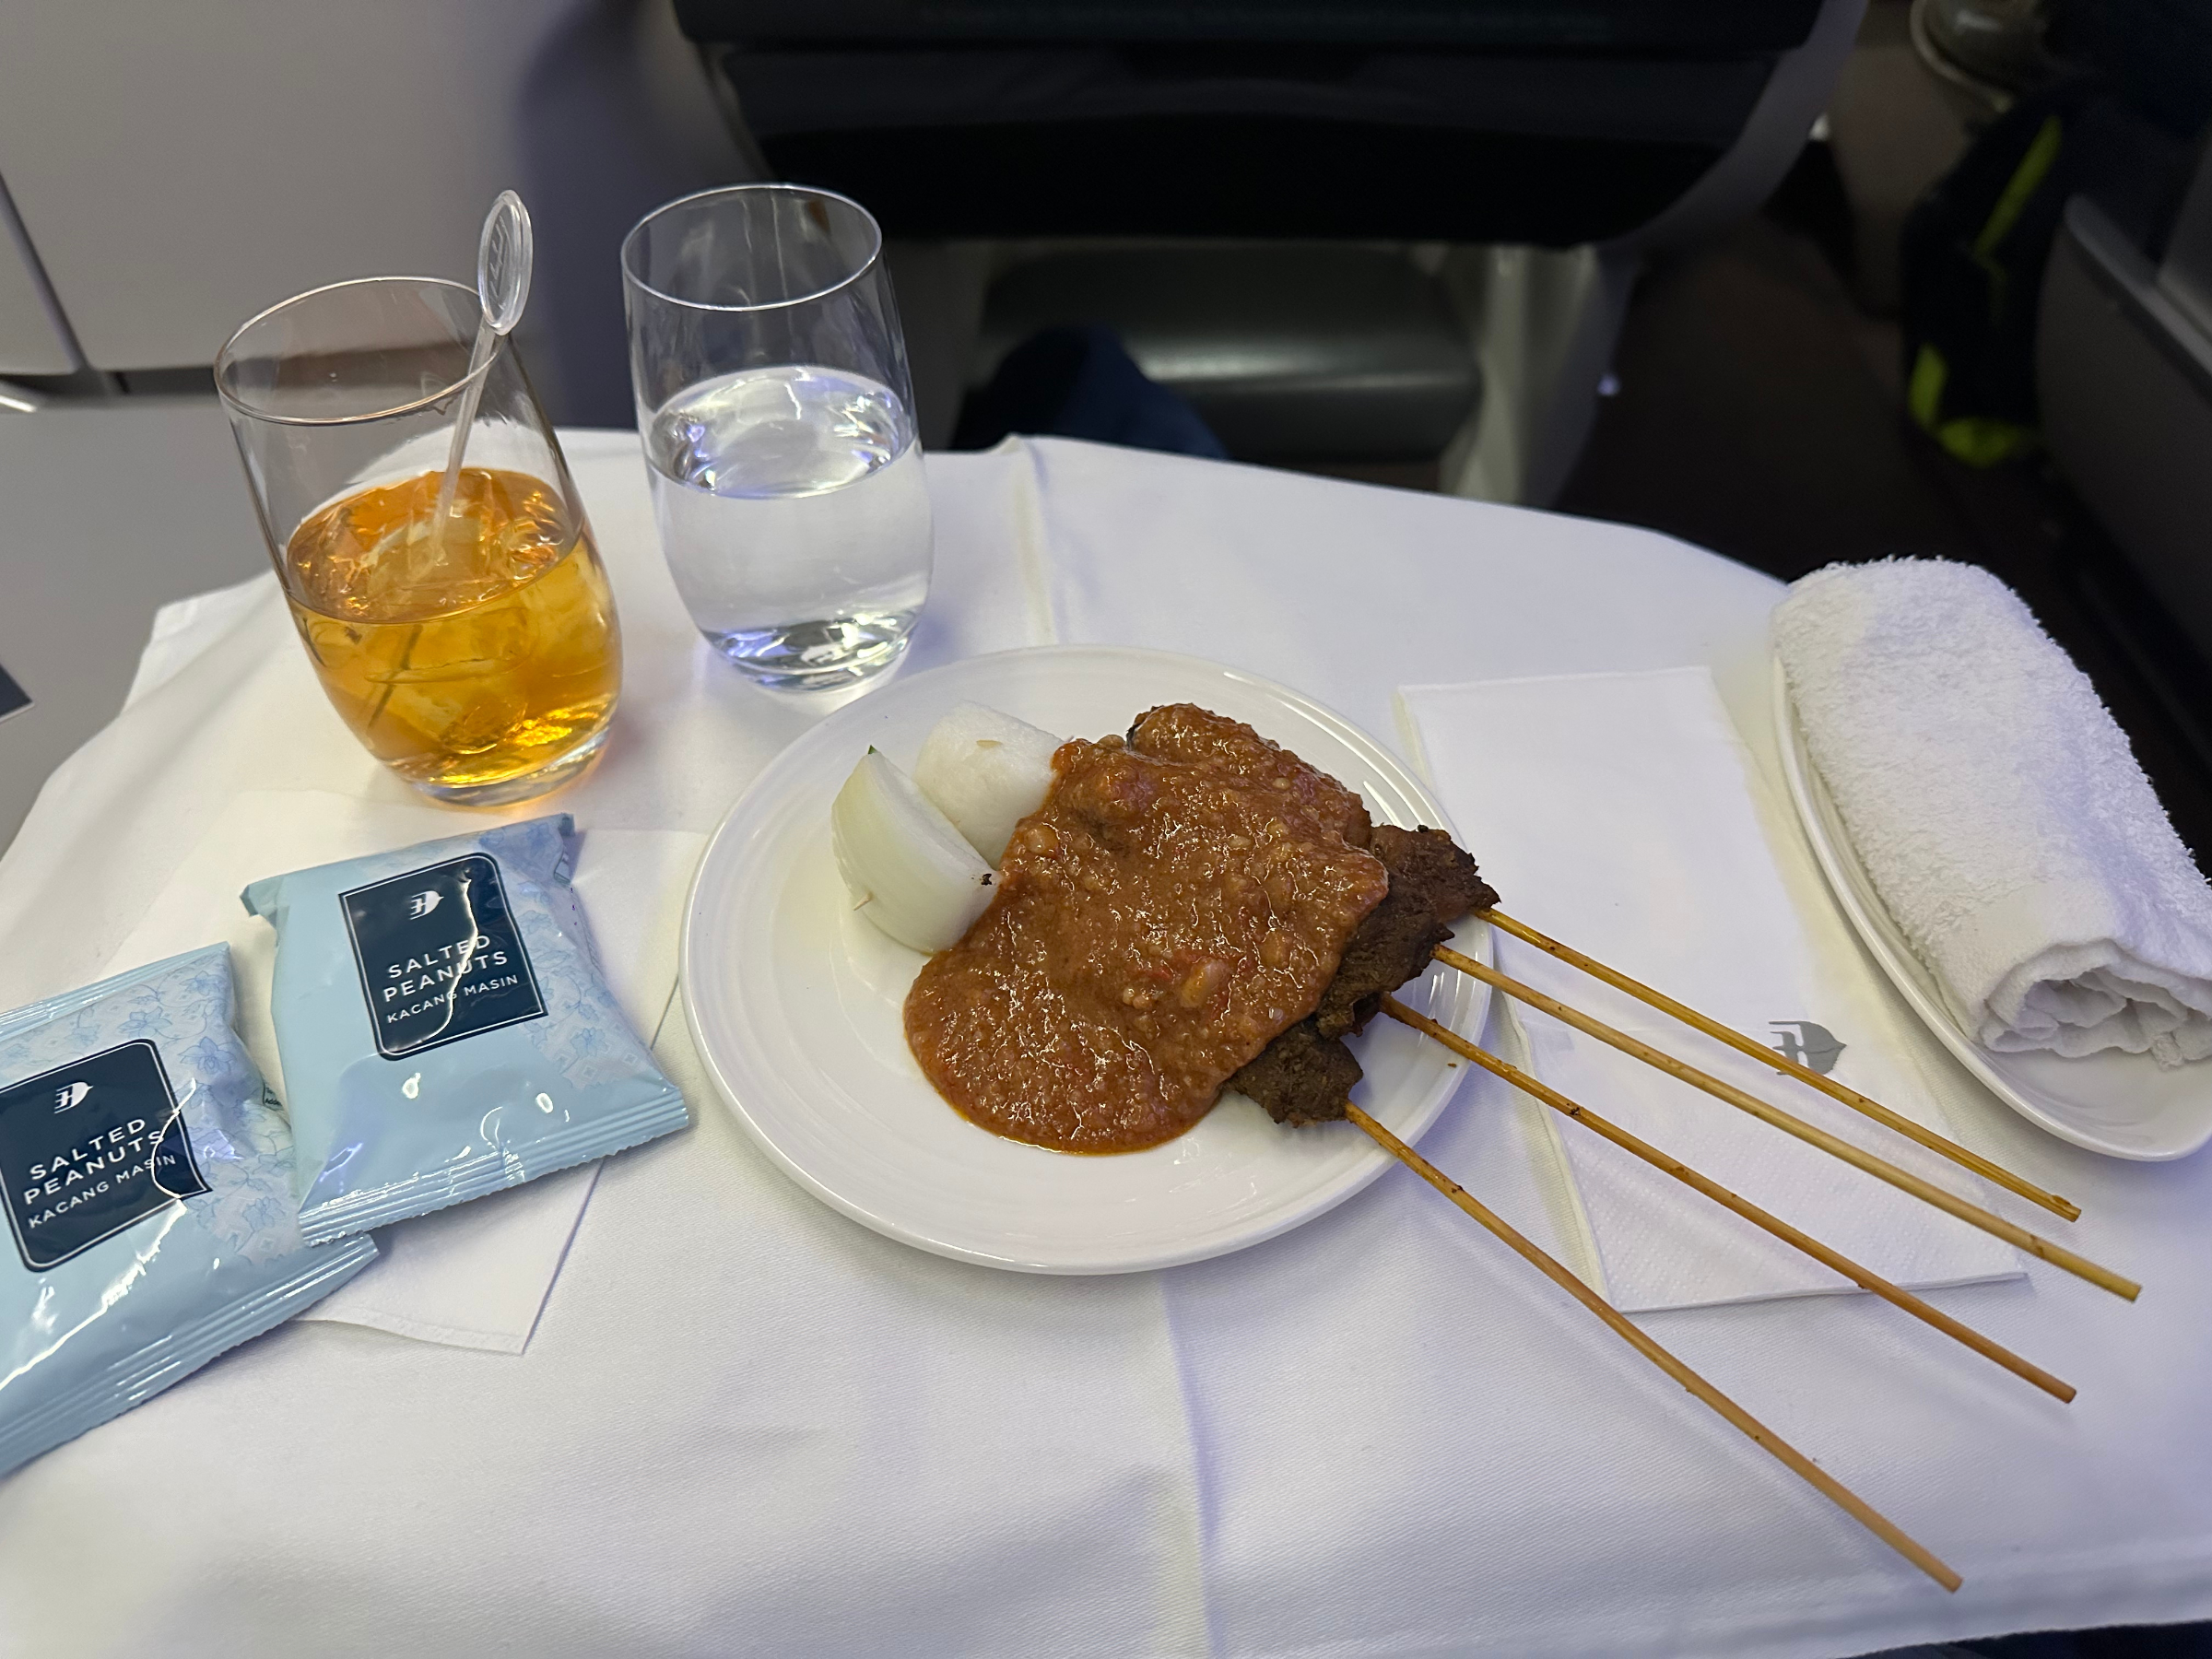 Malaysia Airlines Business Class meal - satay